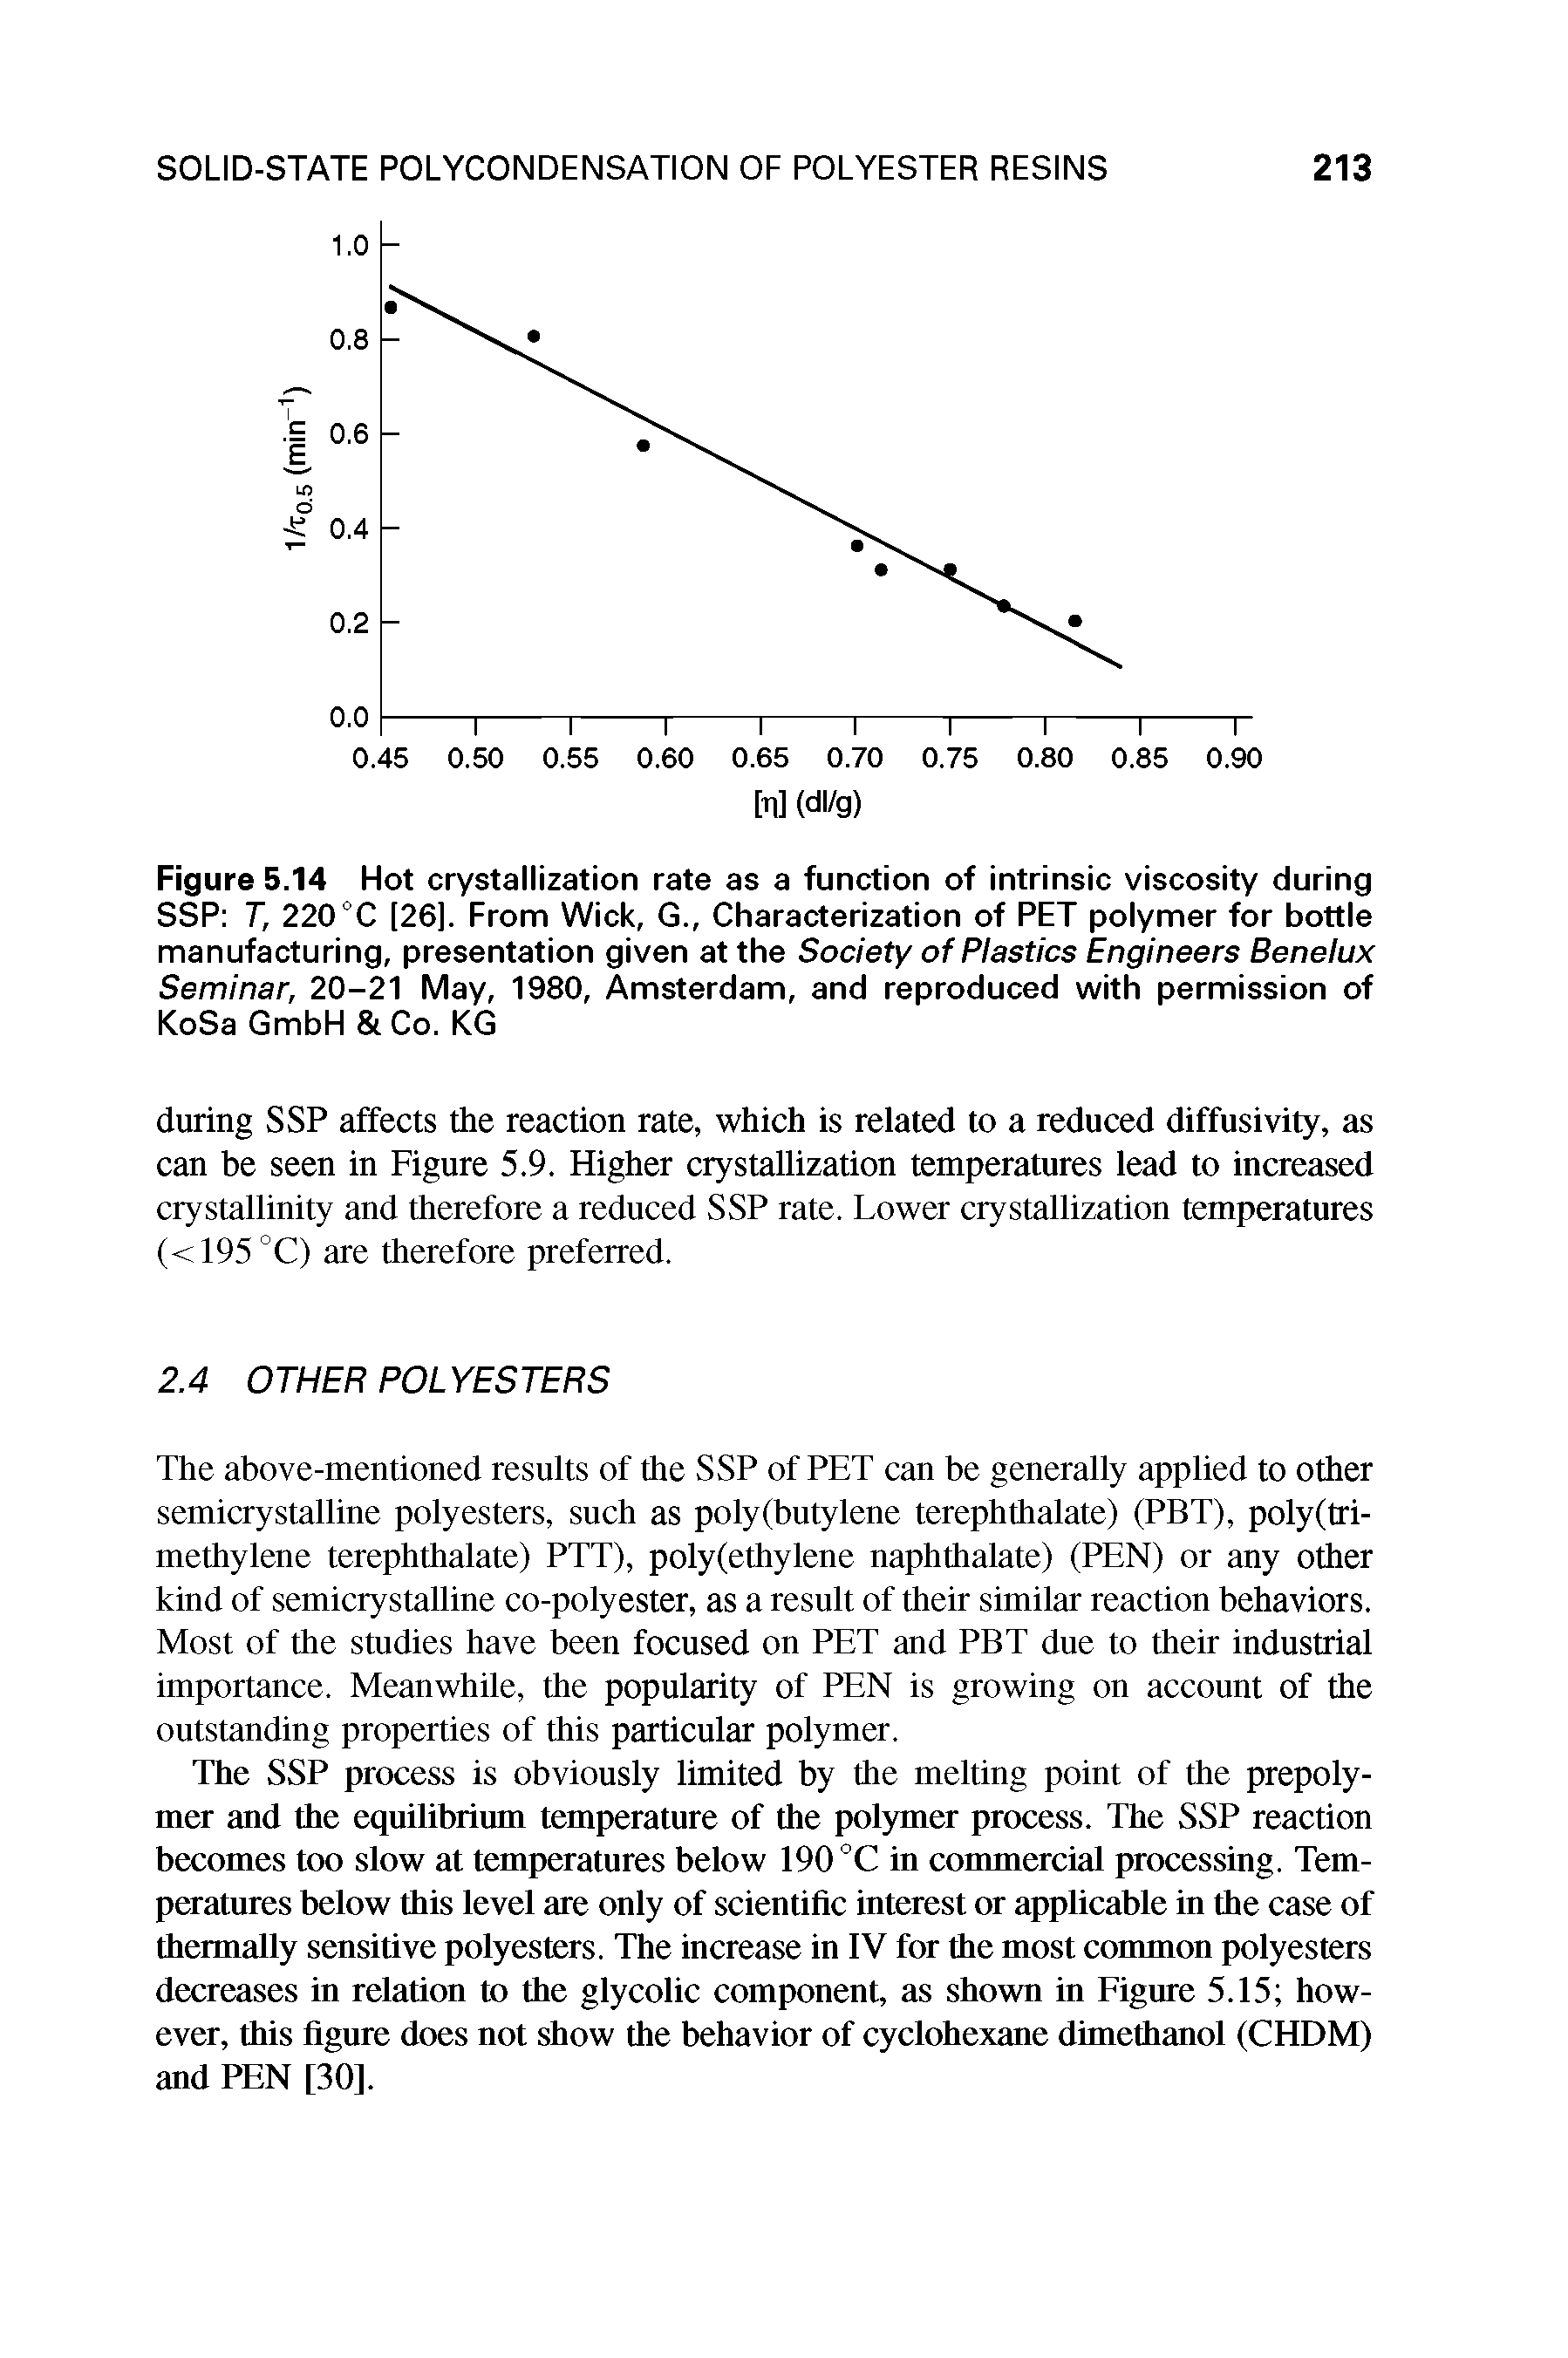 Figure 5.14 Hot crystallization rate as a function of intrinsic viscosity during SSP T, 220 °C [26]. From Wick, G., Characterization of PET polymer for bottle manufacturing, presentation given at the Society of Plastics Engineers Benelux Seminar, 20-21 May, 1980, Amsterdam, and reproduced with permission of KoSa GmbH Co. KG...